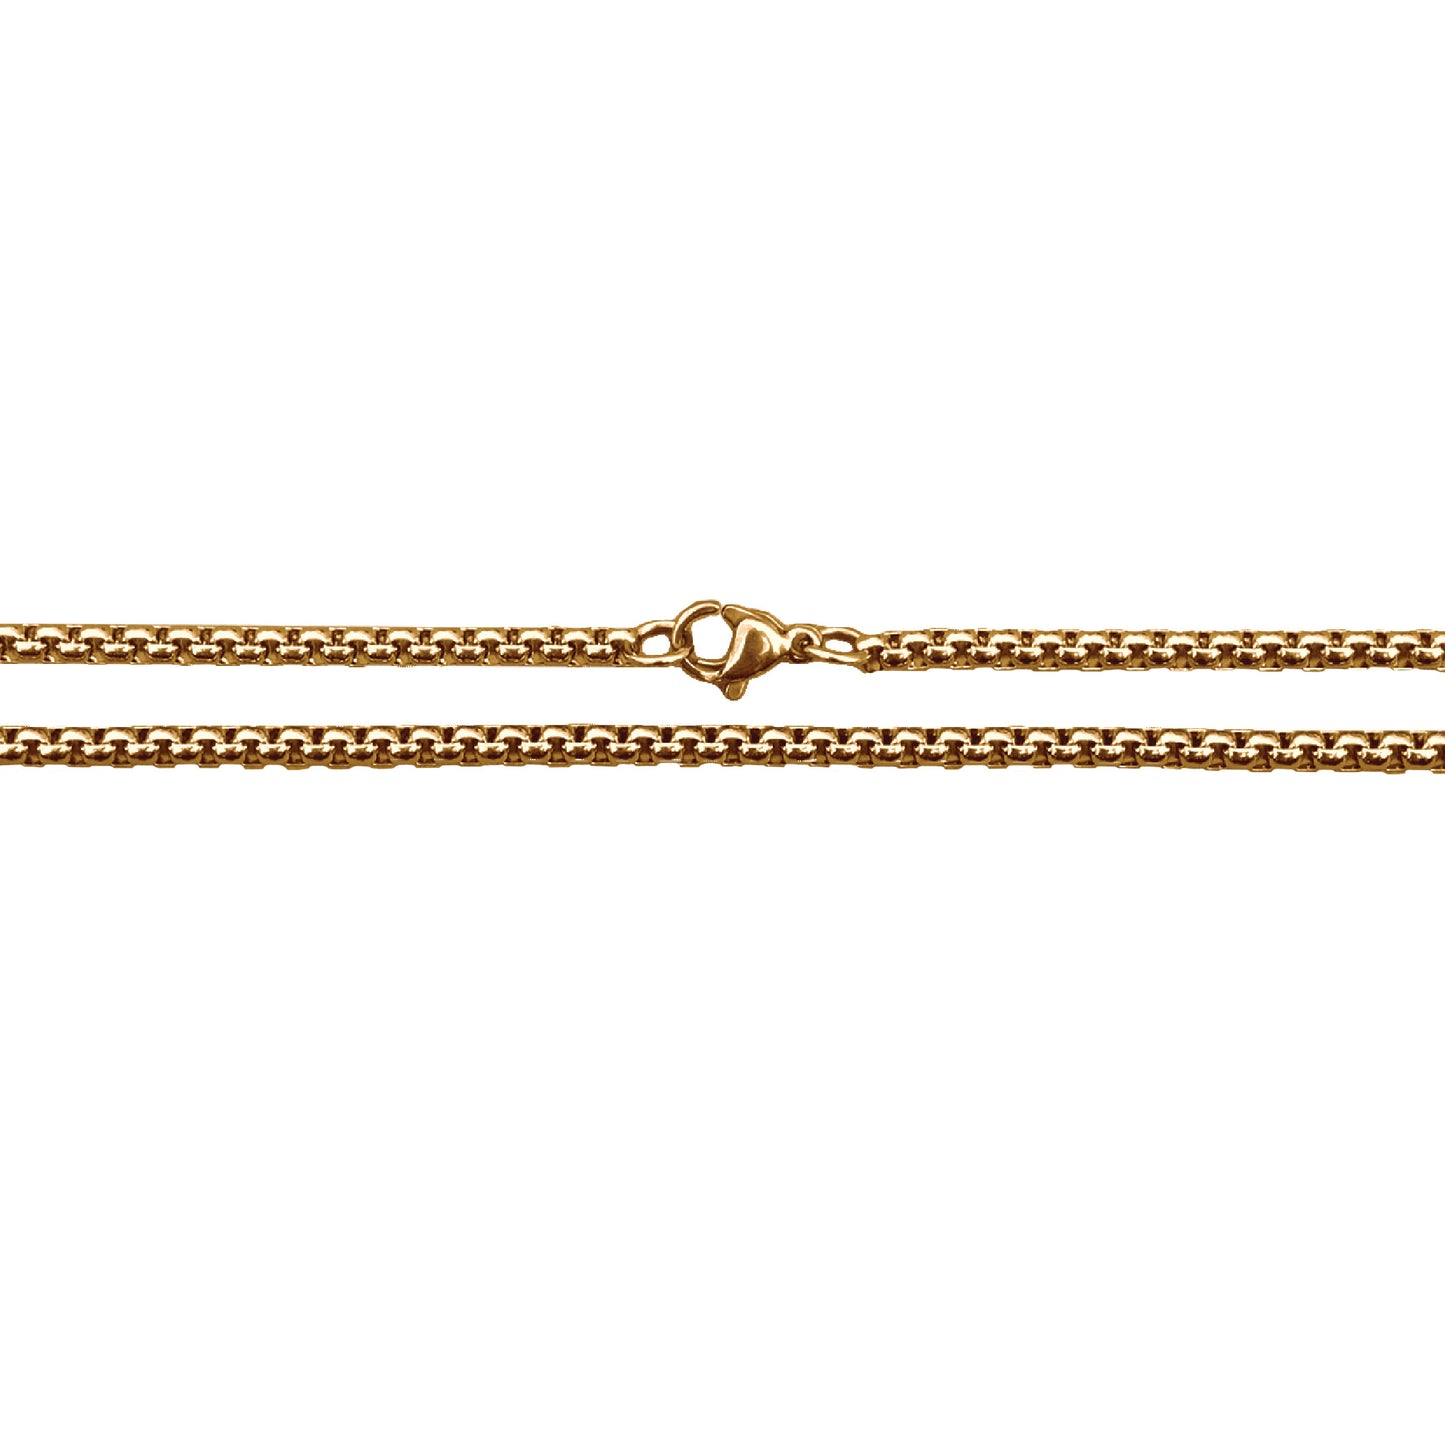 Box Chain Necklace - 14K Gold Plated Stainless Steel